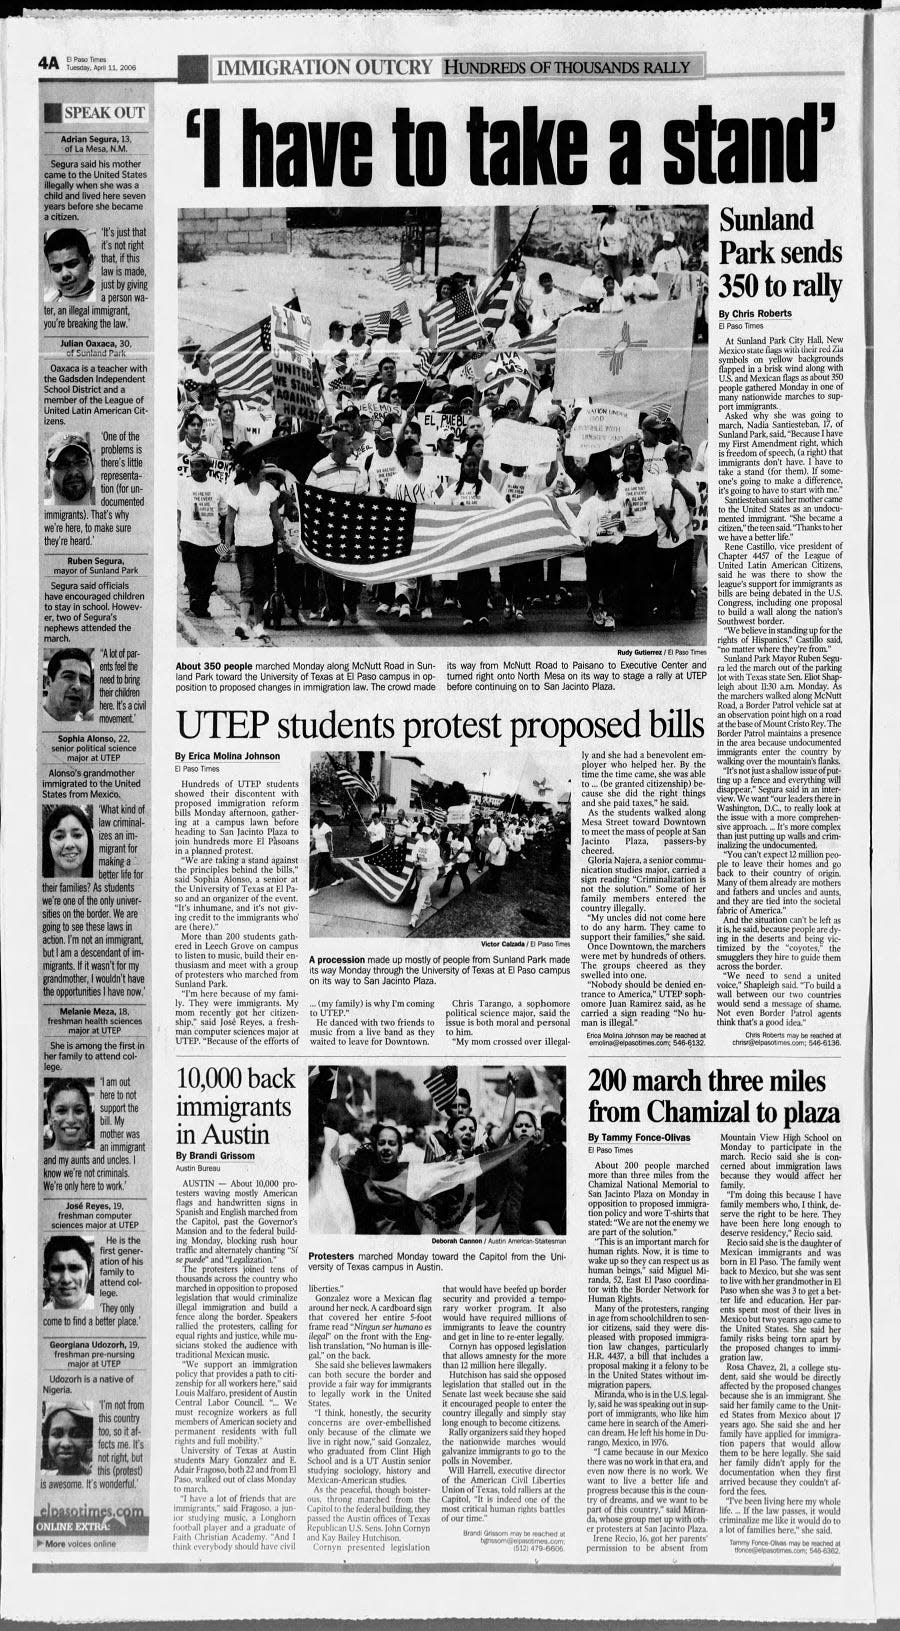 April 11, 2006: UTEP students protest proposed changes in immigration law.